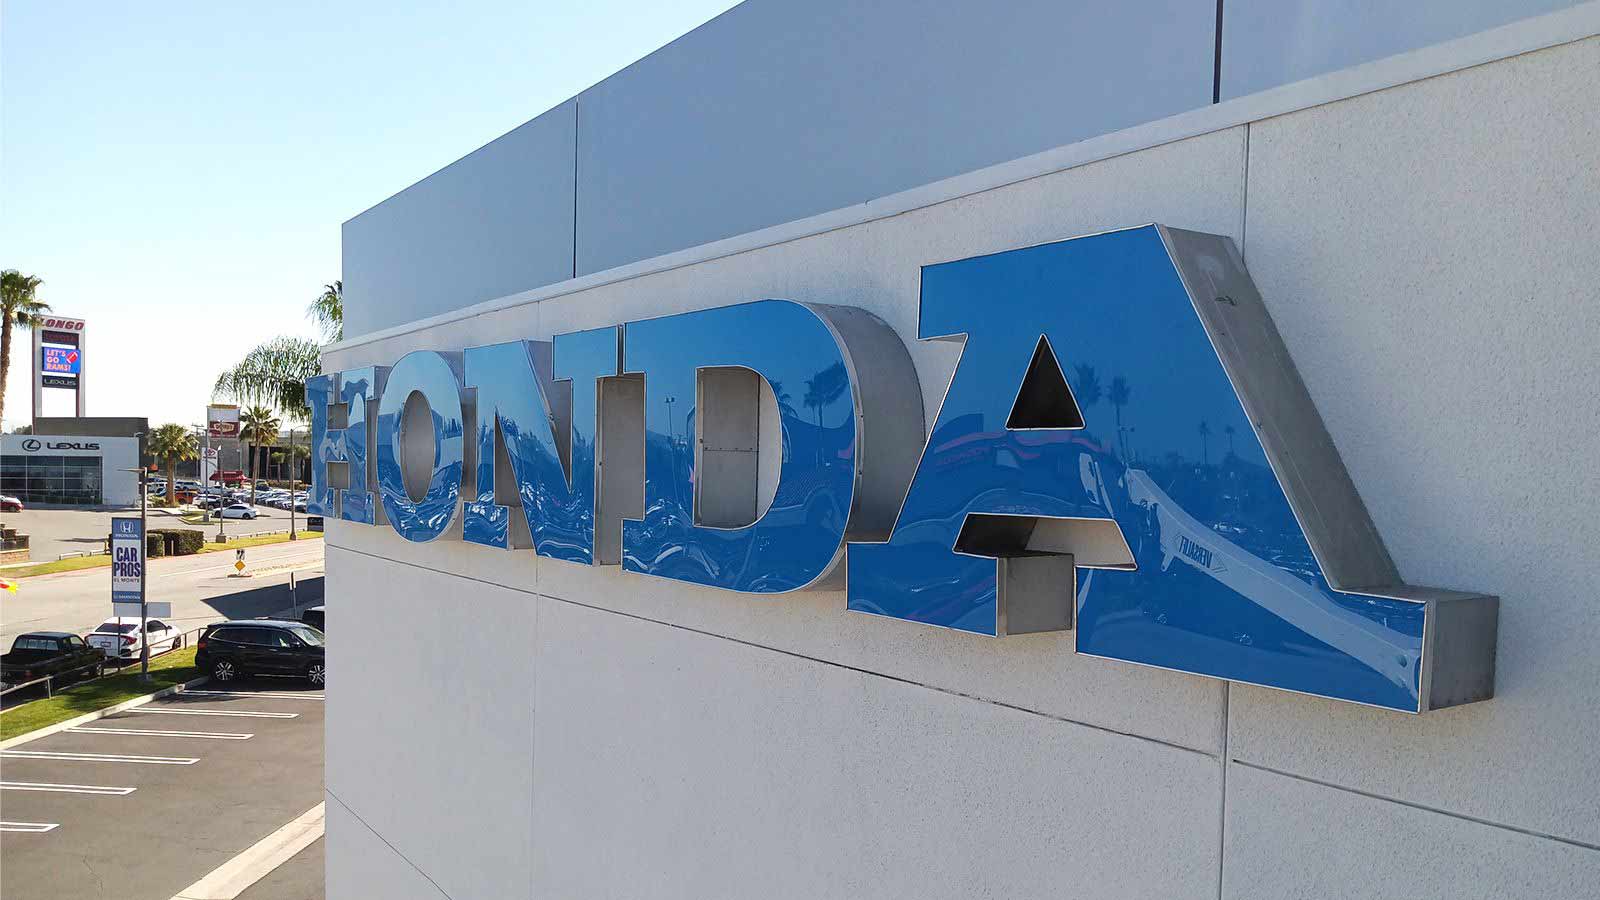 honda building mounted channel letters